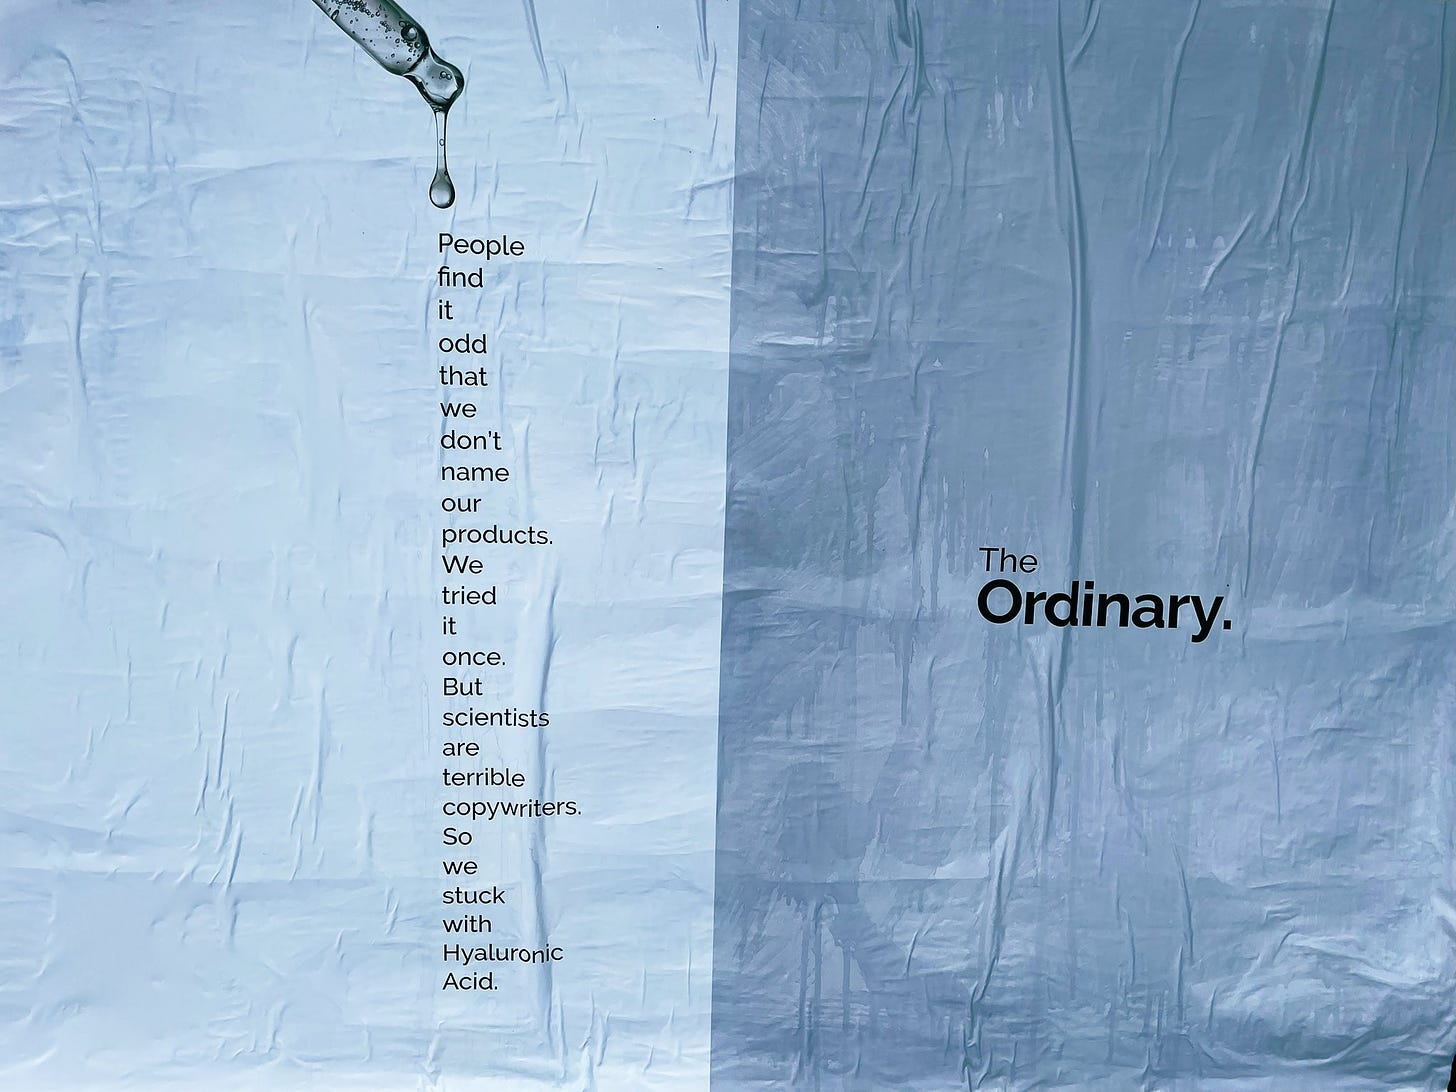 An ad for The Ordinary - copy says: 

People find it odd that we don’t name our products. We tried it once. But scientists are terrible copywriters. So we stuck with Halyuronic Acid.